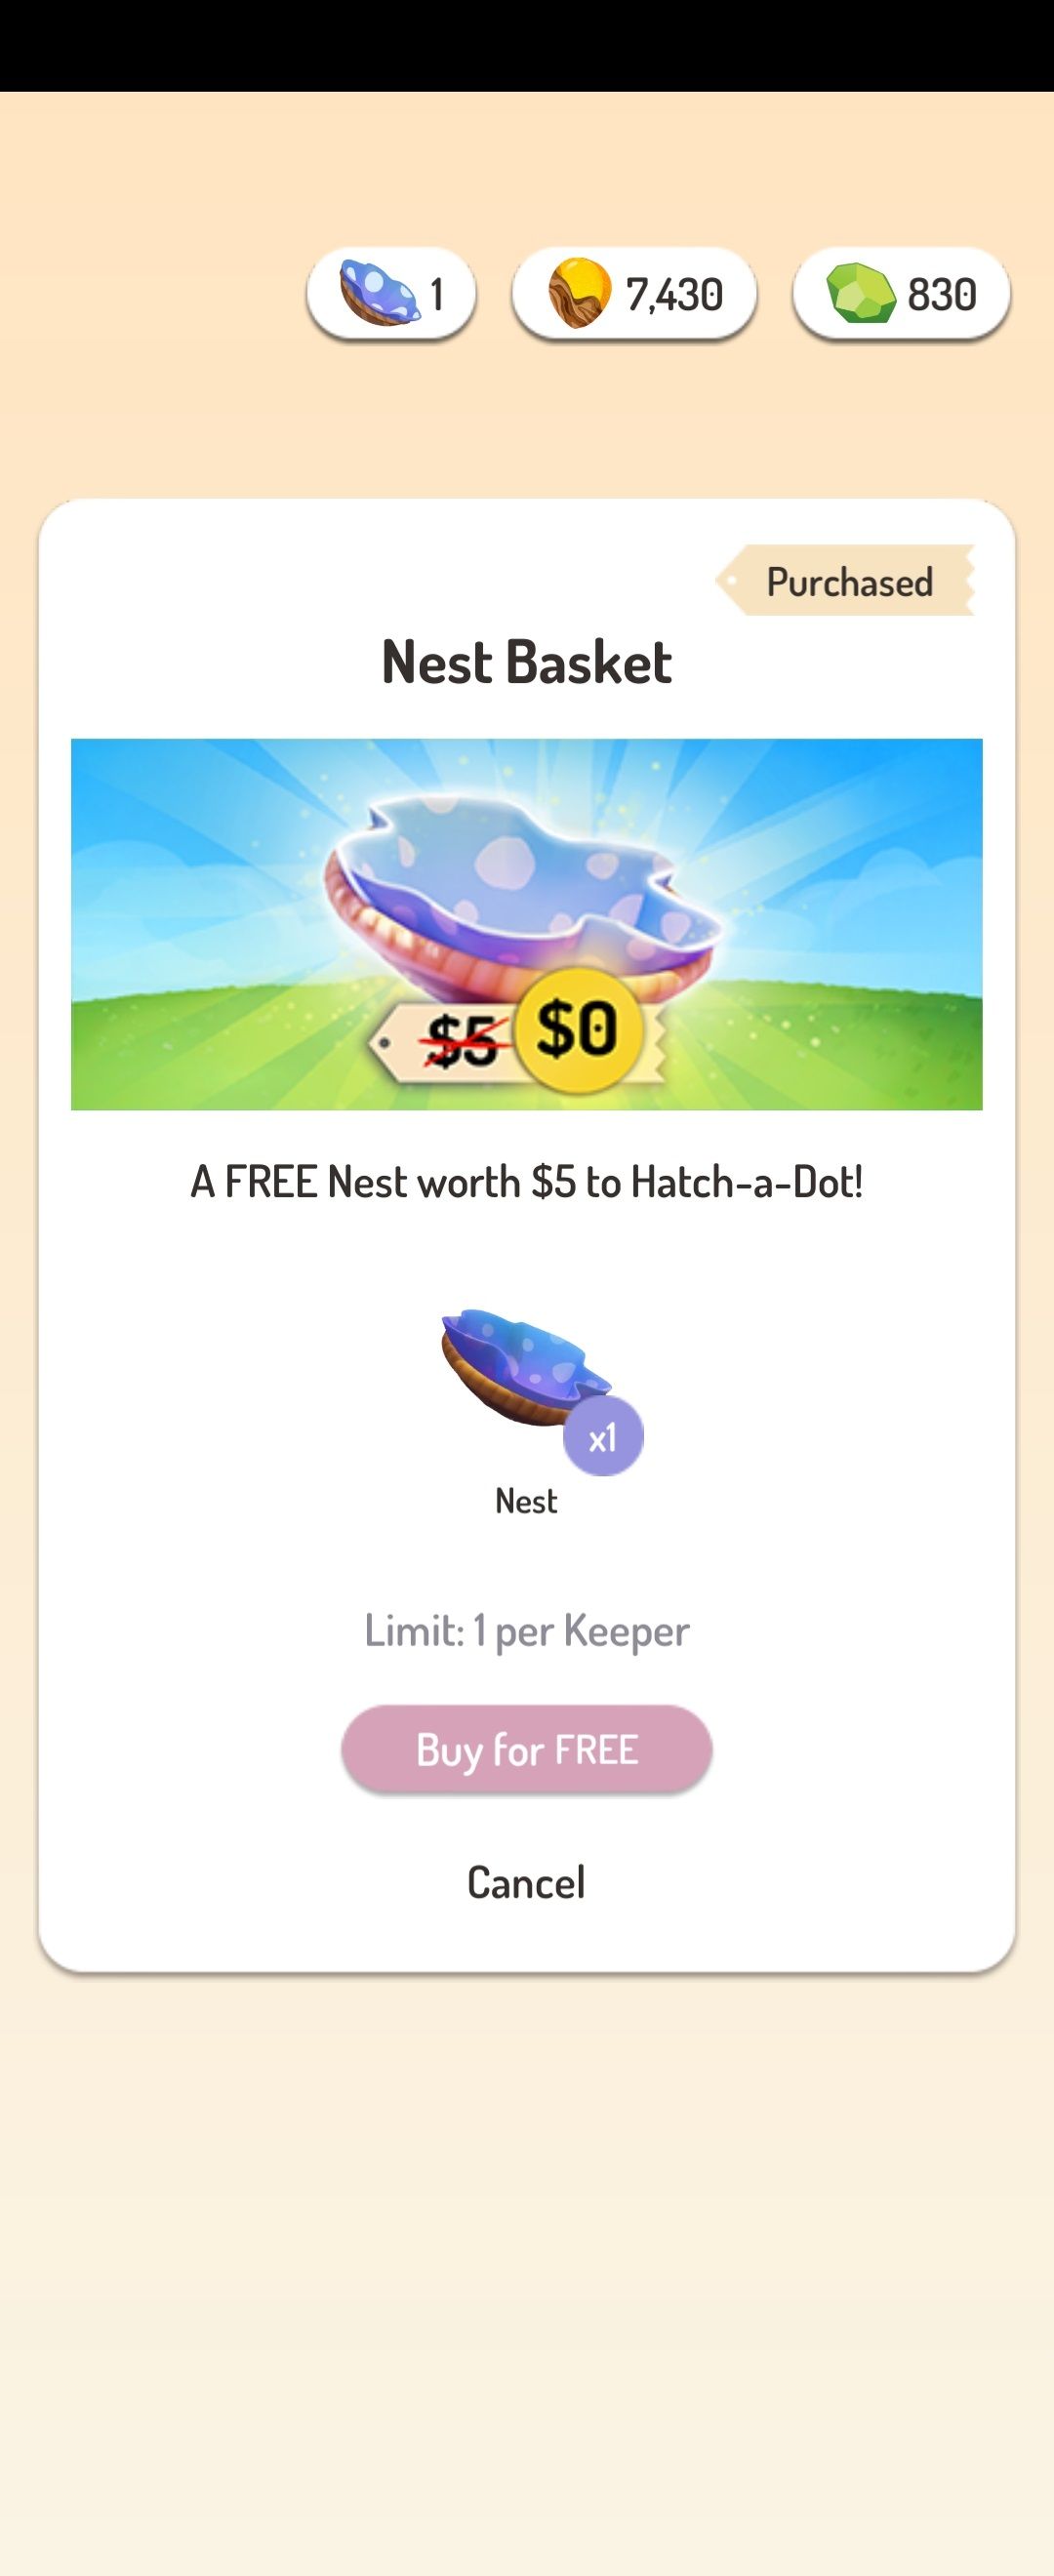 Free Nest Basket in the Peridot Store.